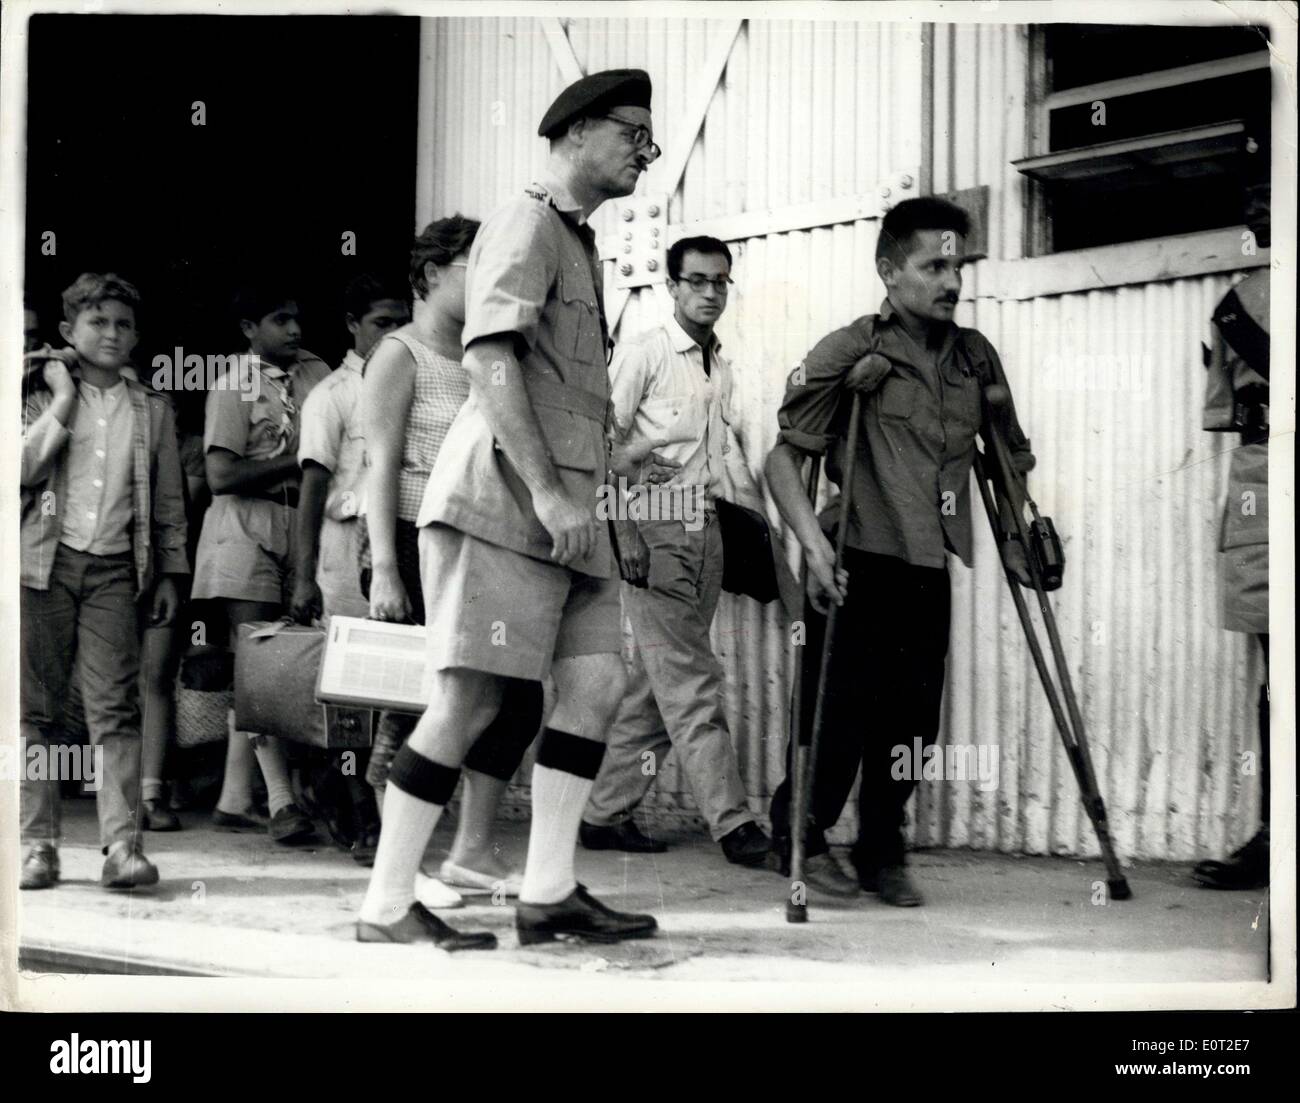 Jul. 19, 1960 - Refugees From Congo Arrive in Dar Es Salaam - hoto Shows:- A Crippled Belgian Worker, Walks on Crutche Stock Photo